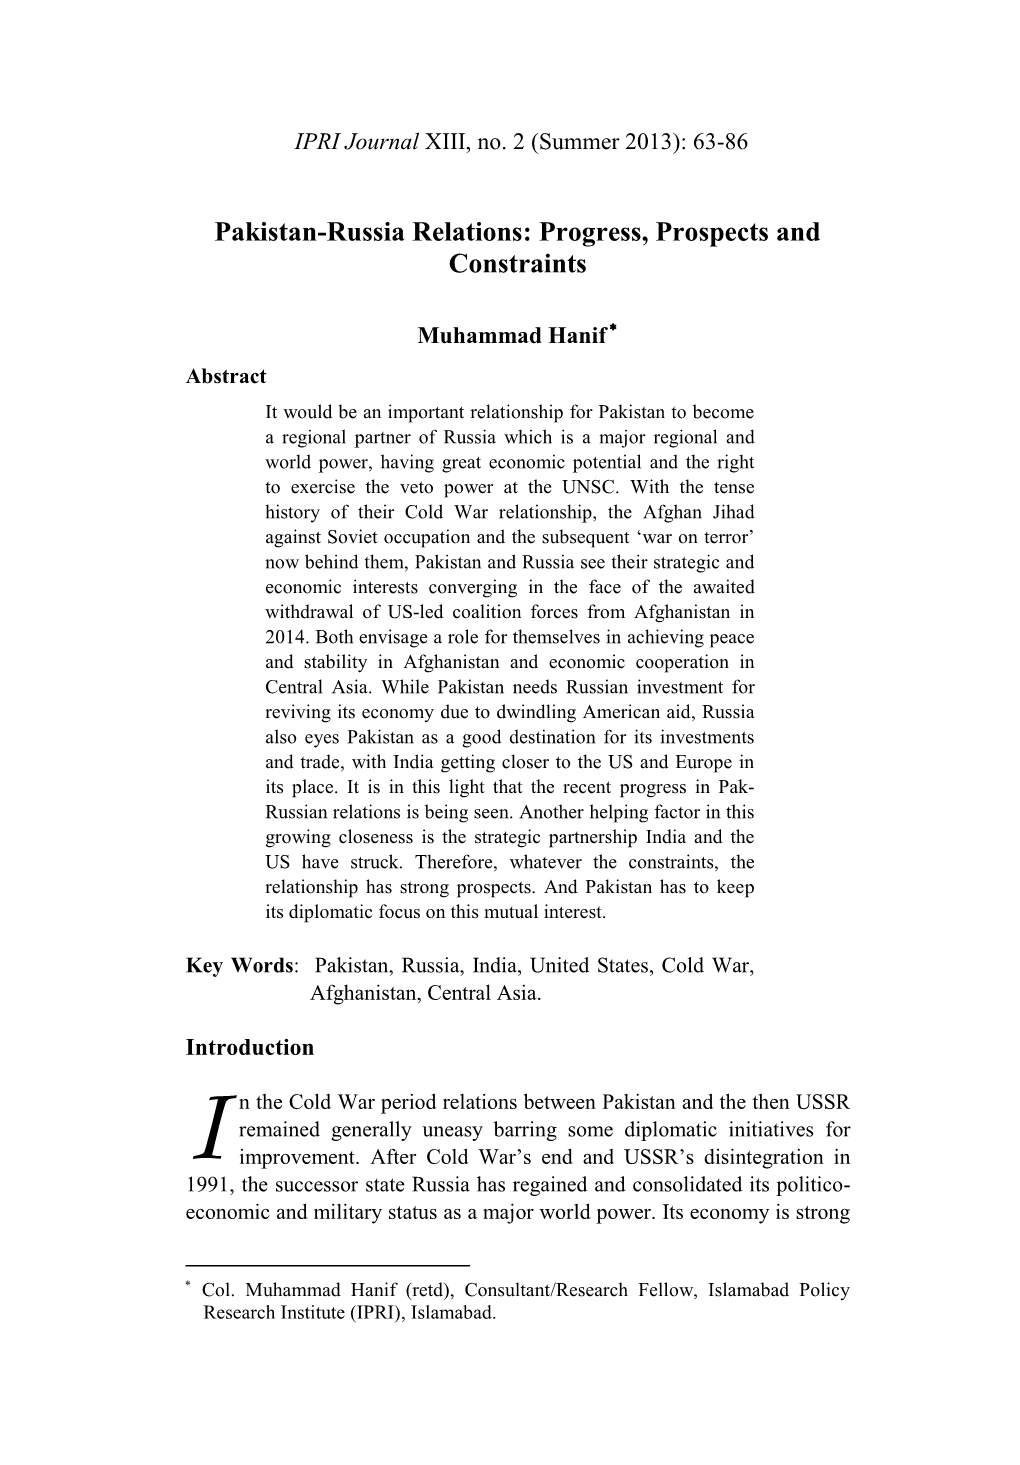 Pakistan-Russia Relations: Progress, Prospects and Constraints 63